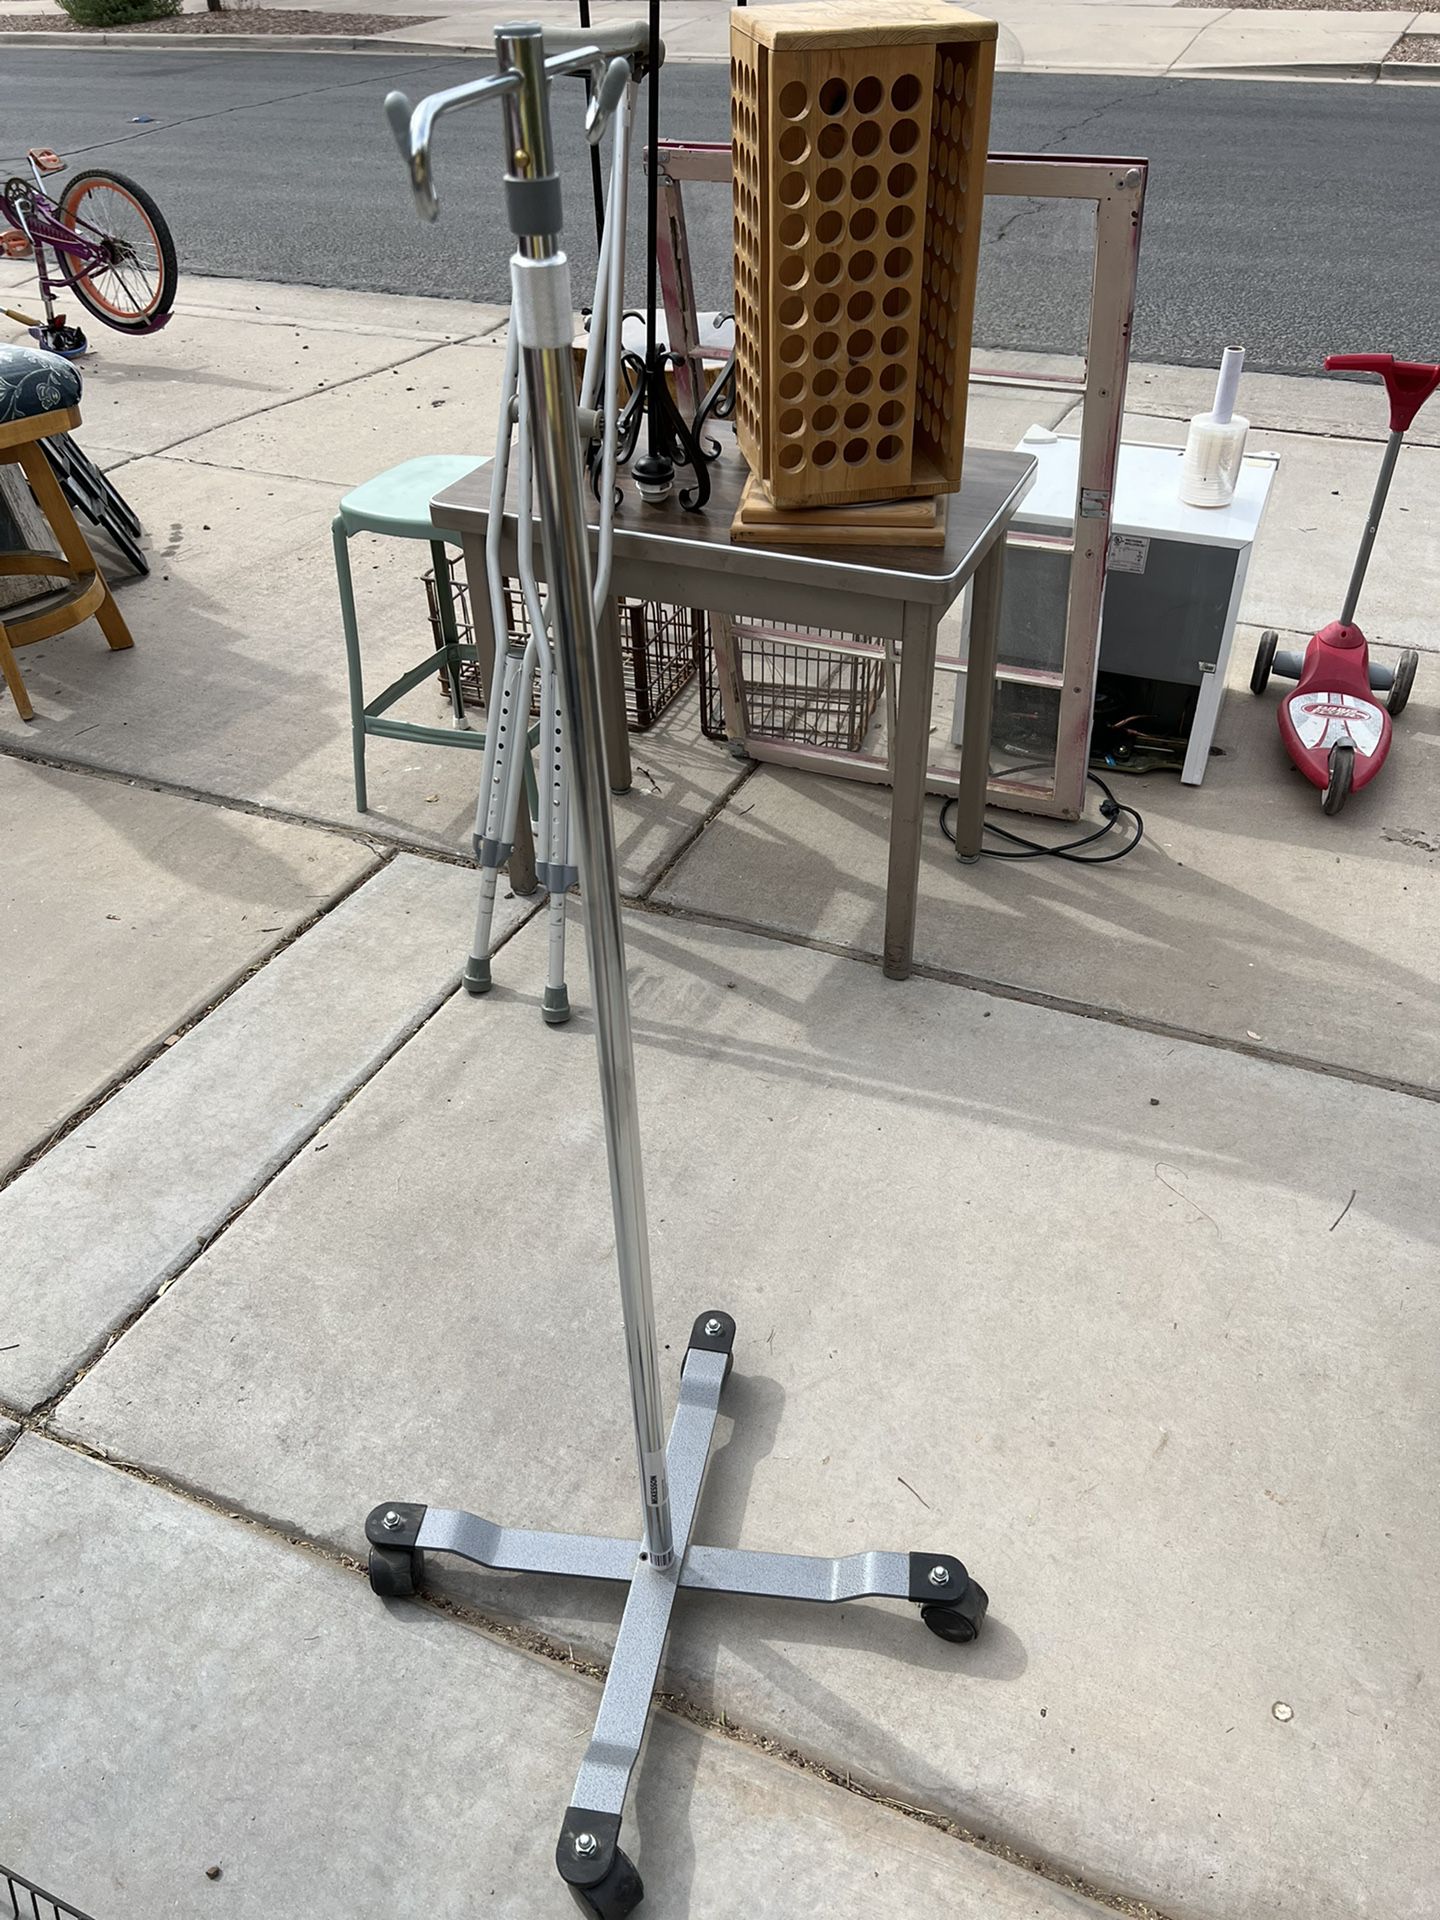 IV Stand On Wheels, High Quality, New! $25.00 OBO